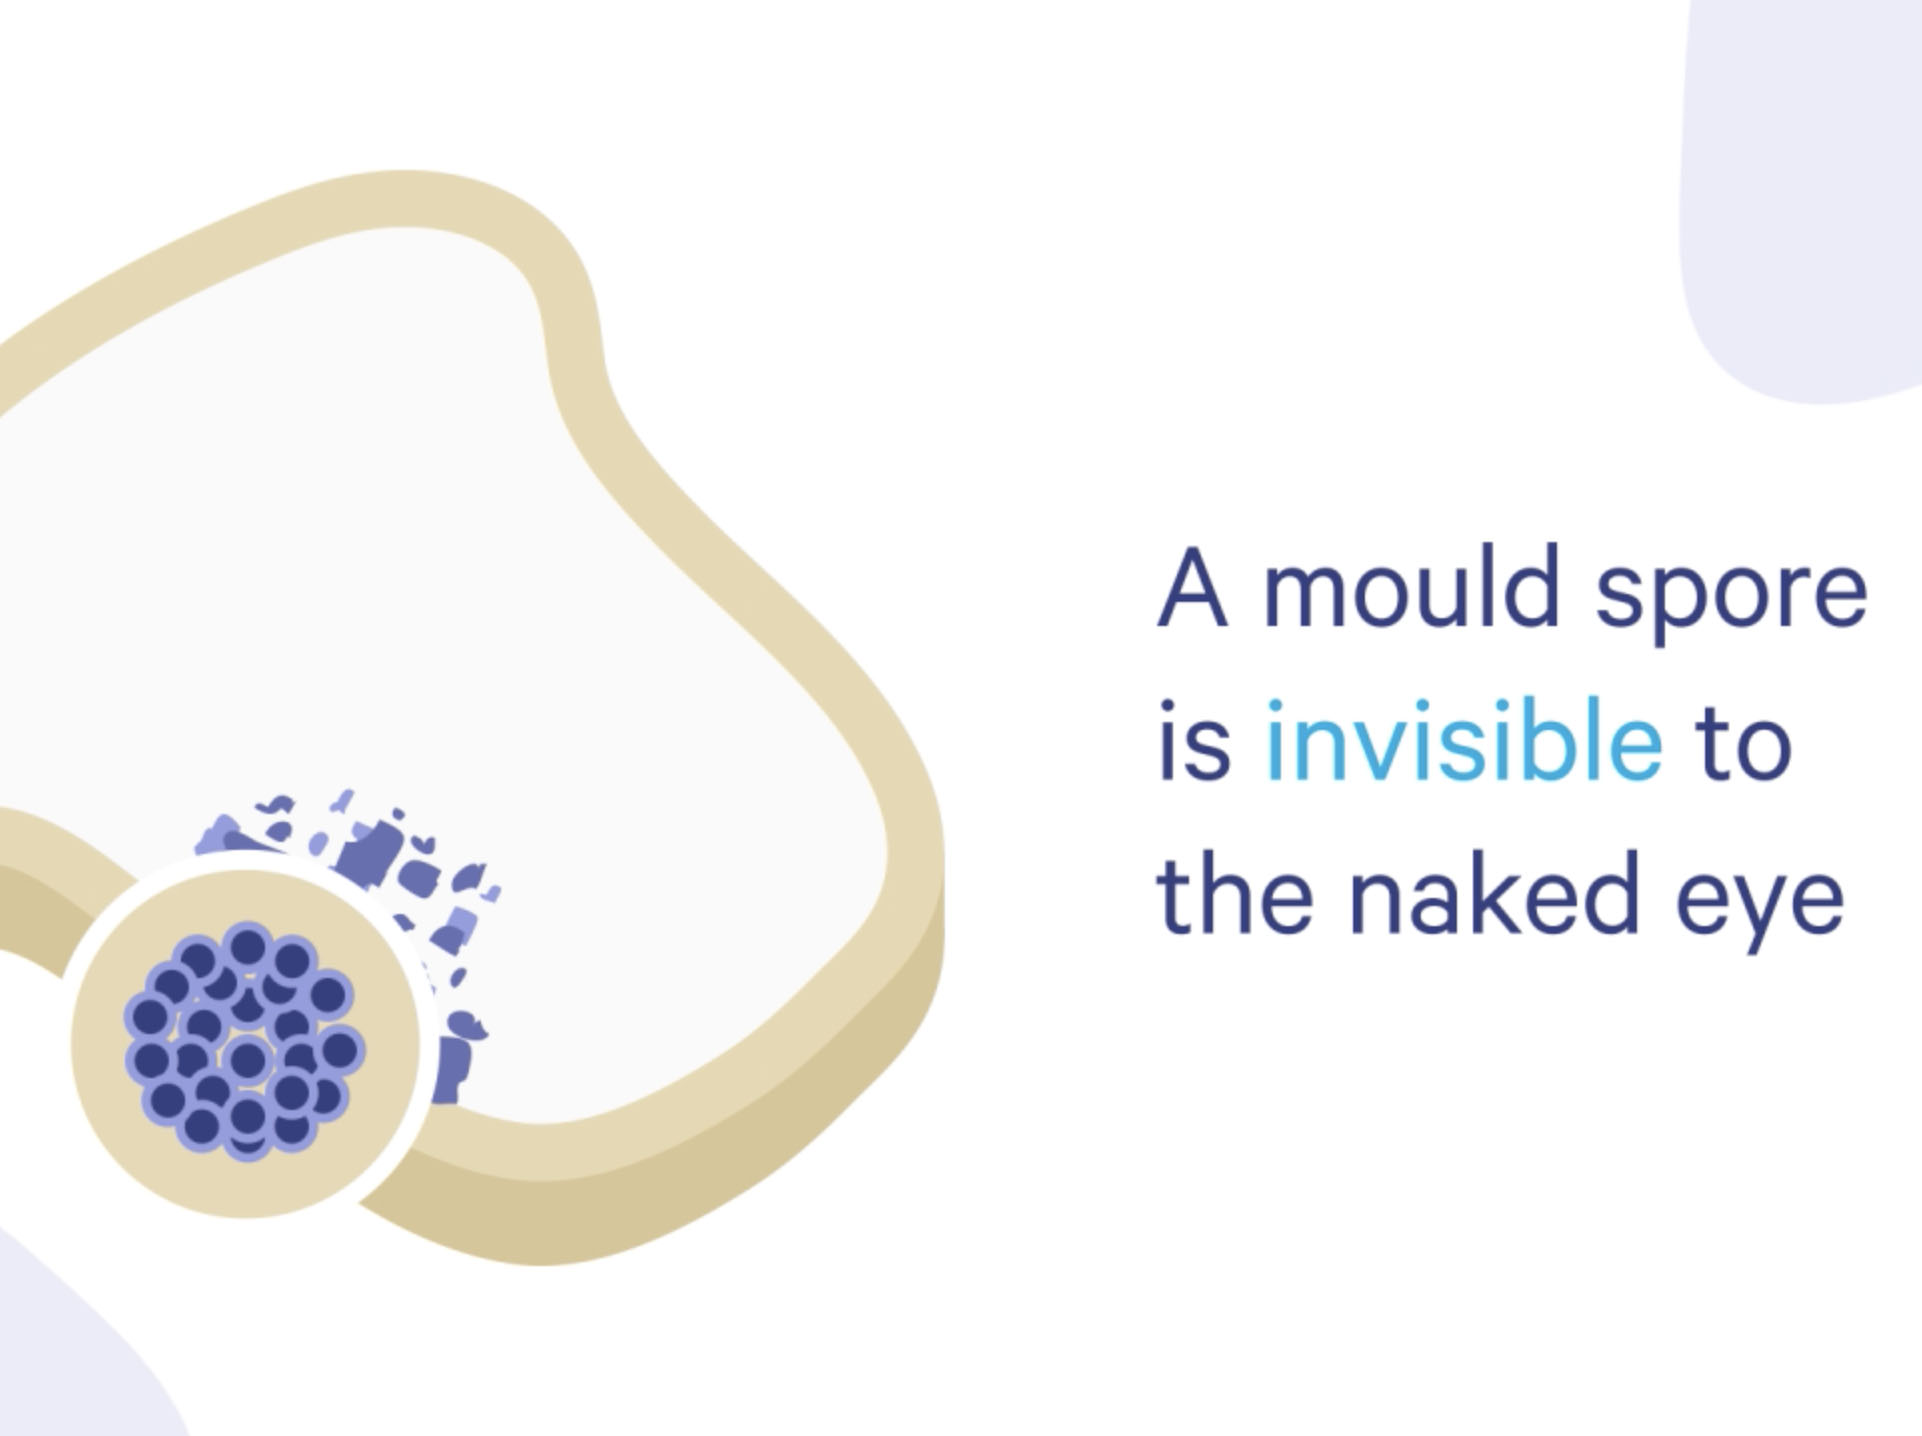 GCG TechLab Mould Awareness Elearning for the Workplace - mould spore invisible to the naked eye